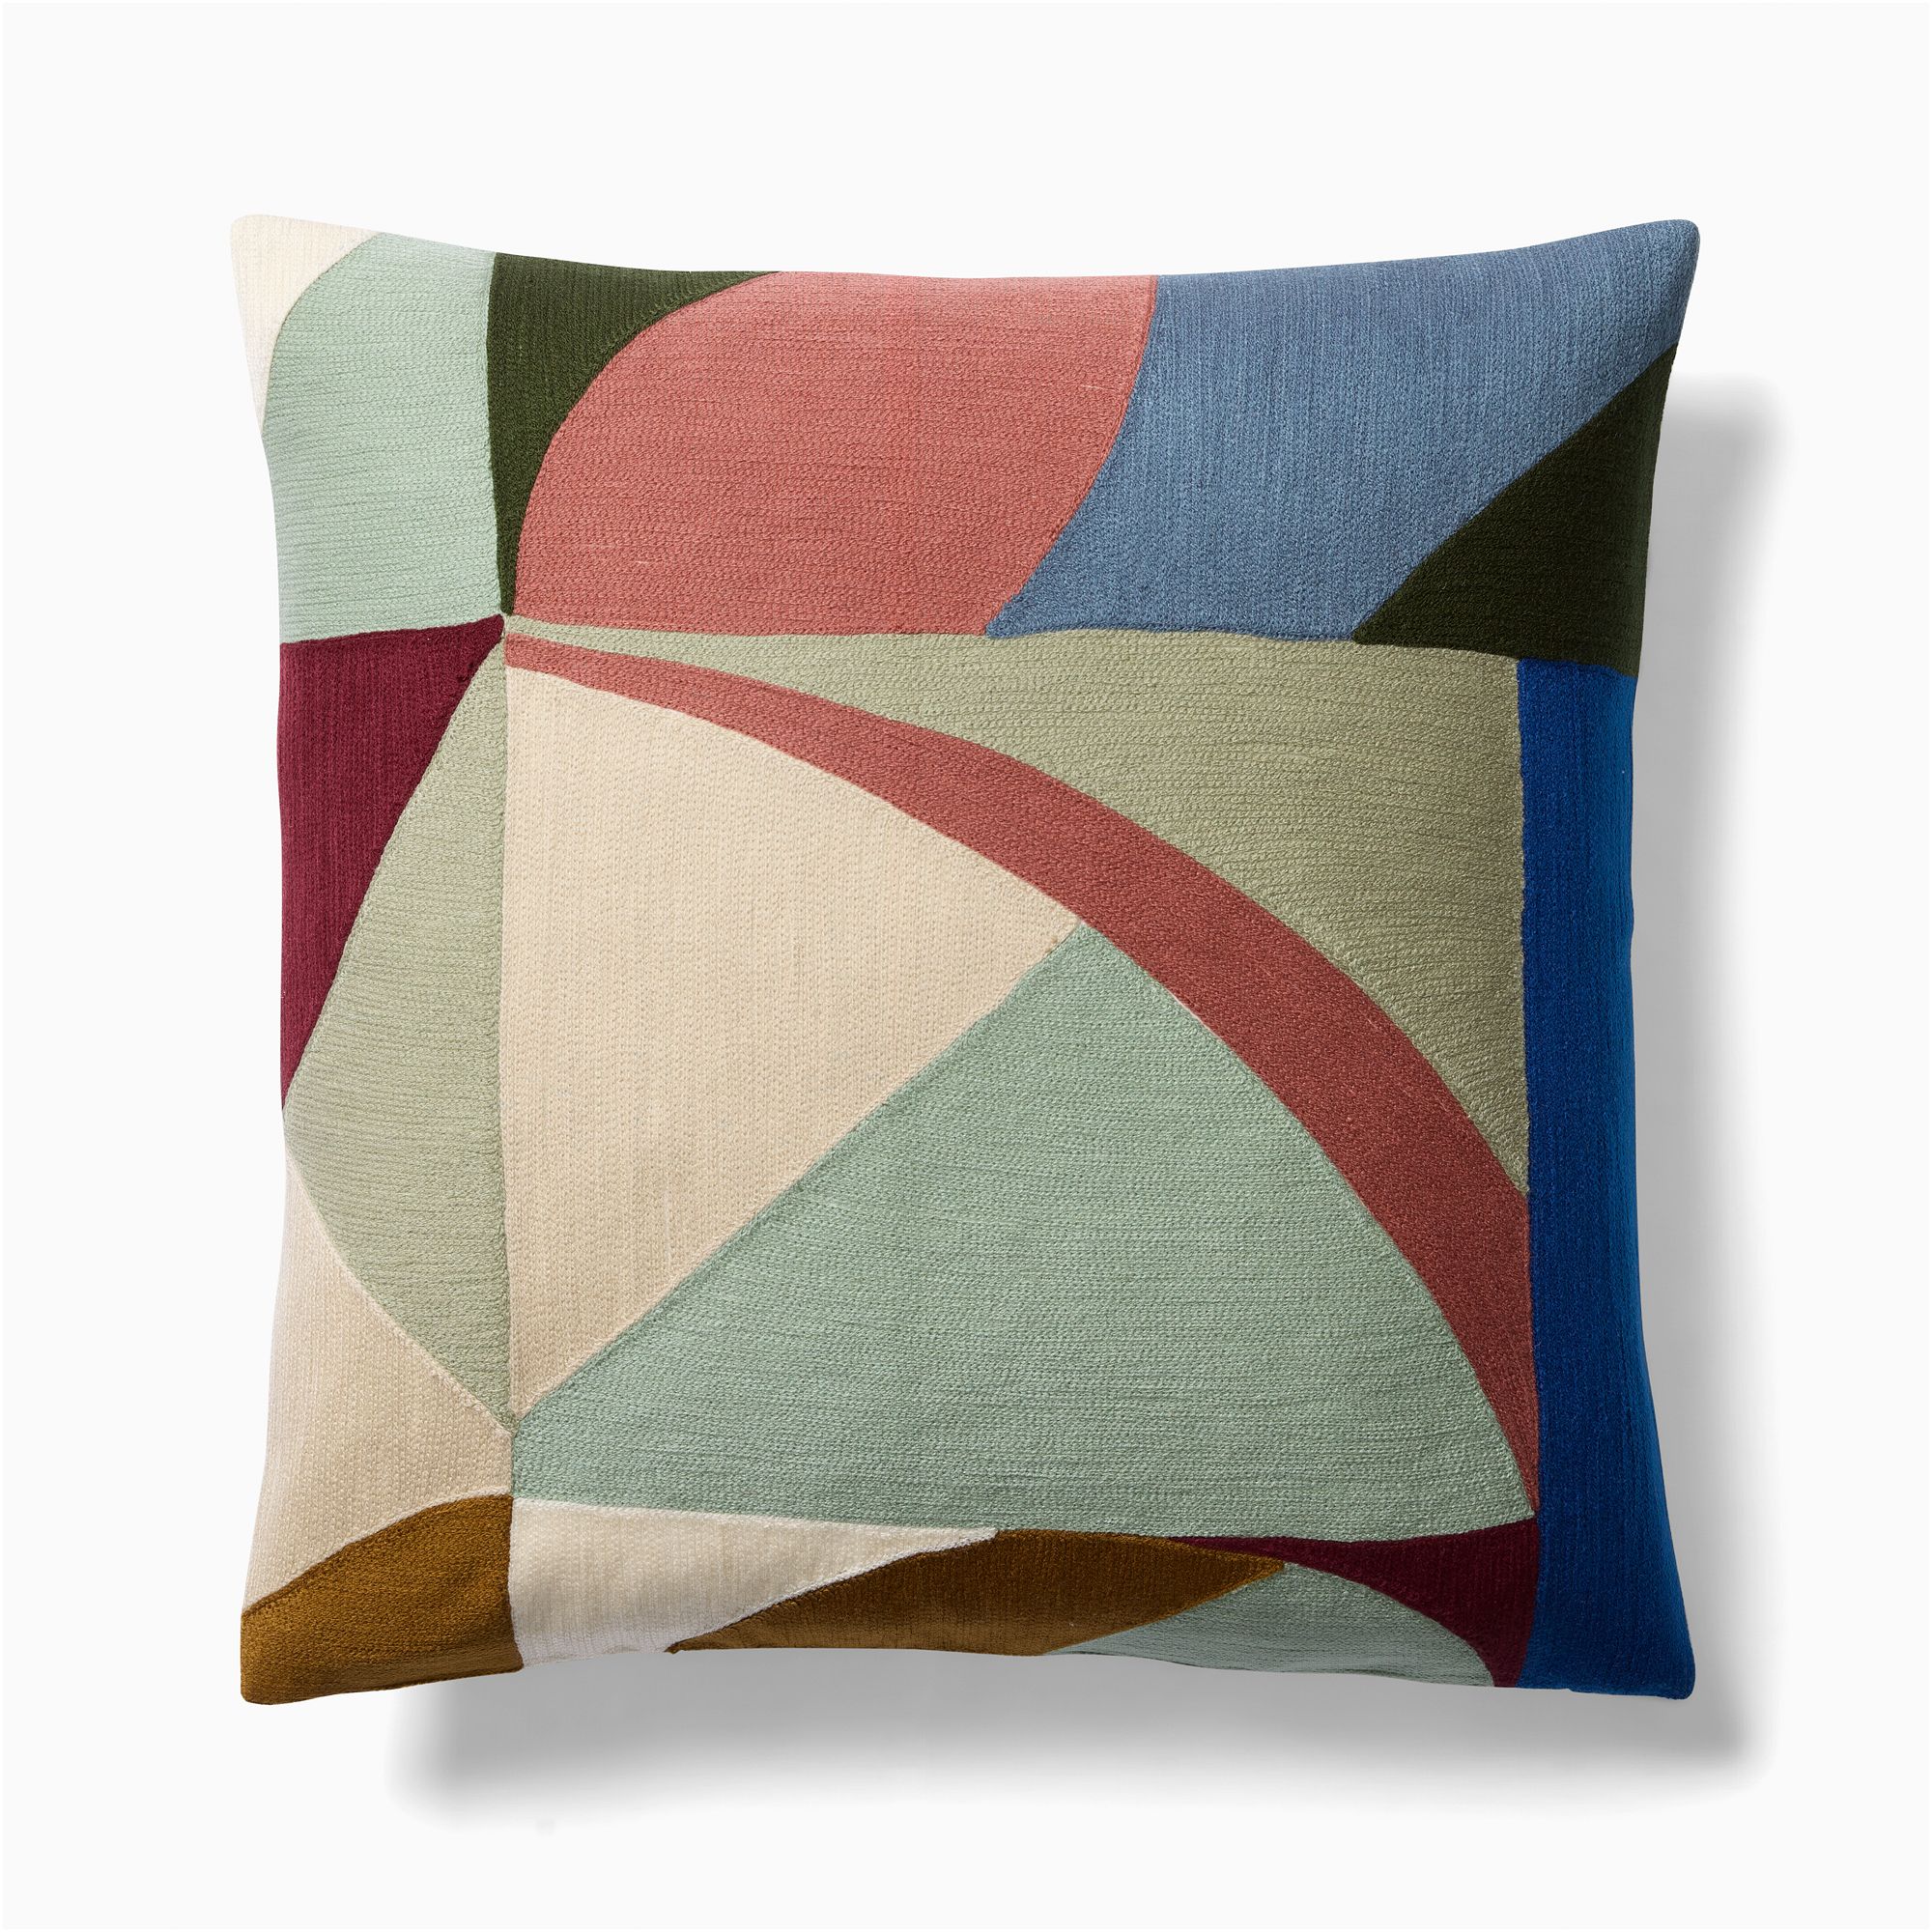 Crewel Colored Shapes Pillow Cover | West Elm